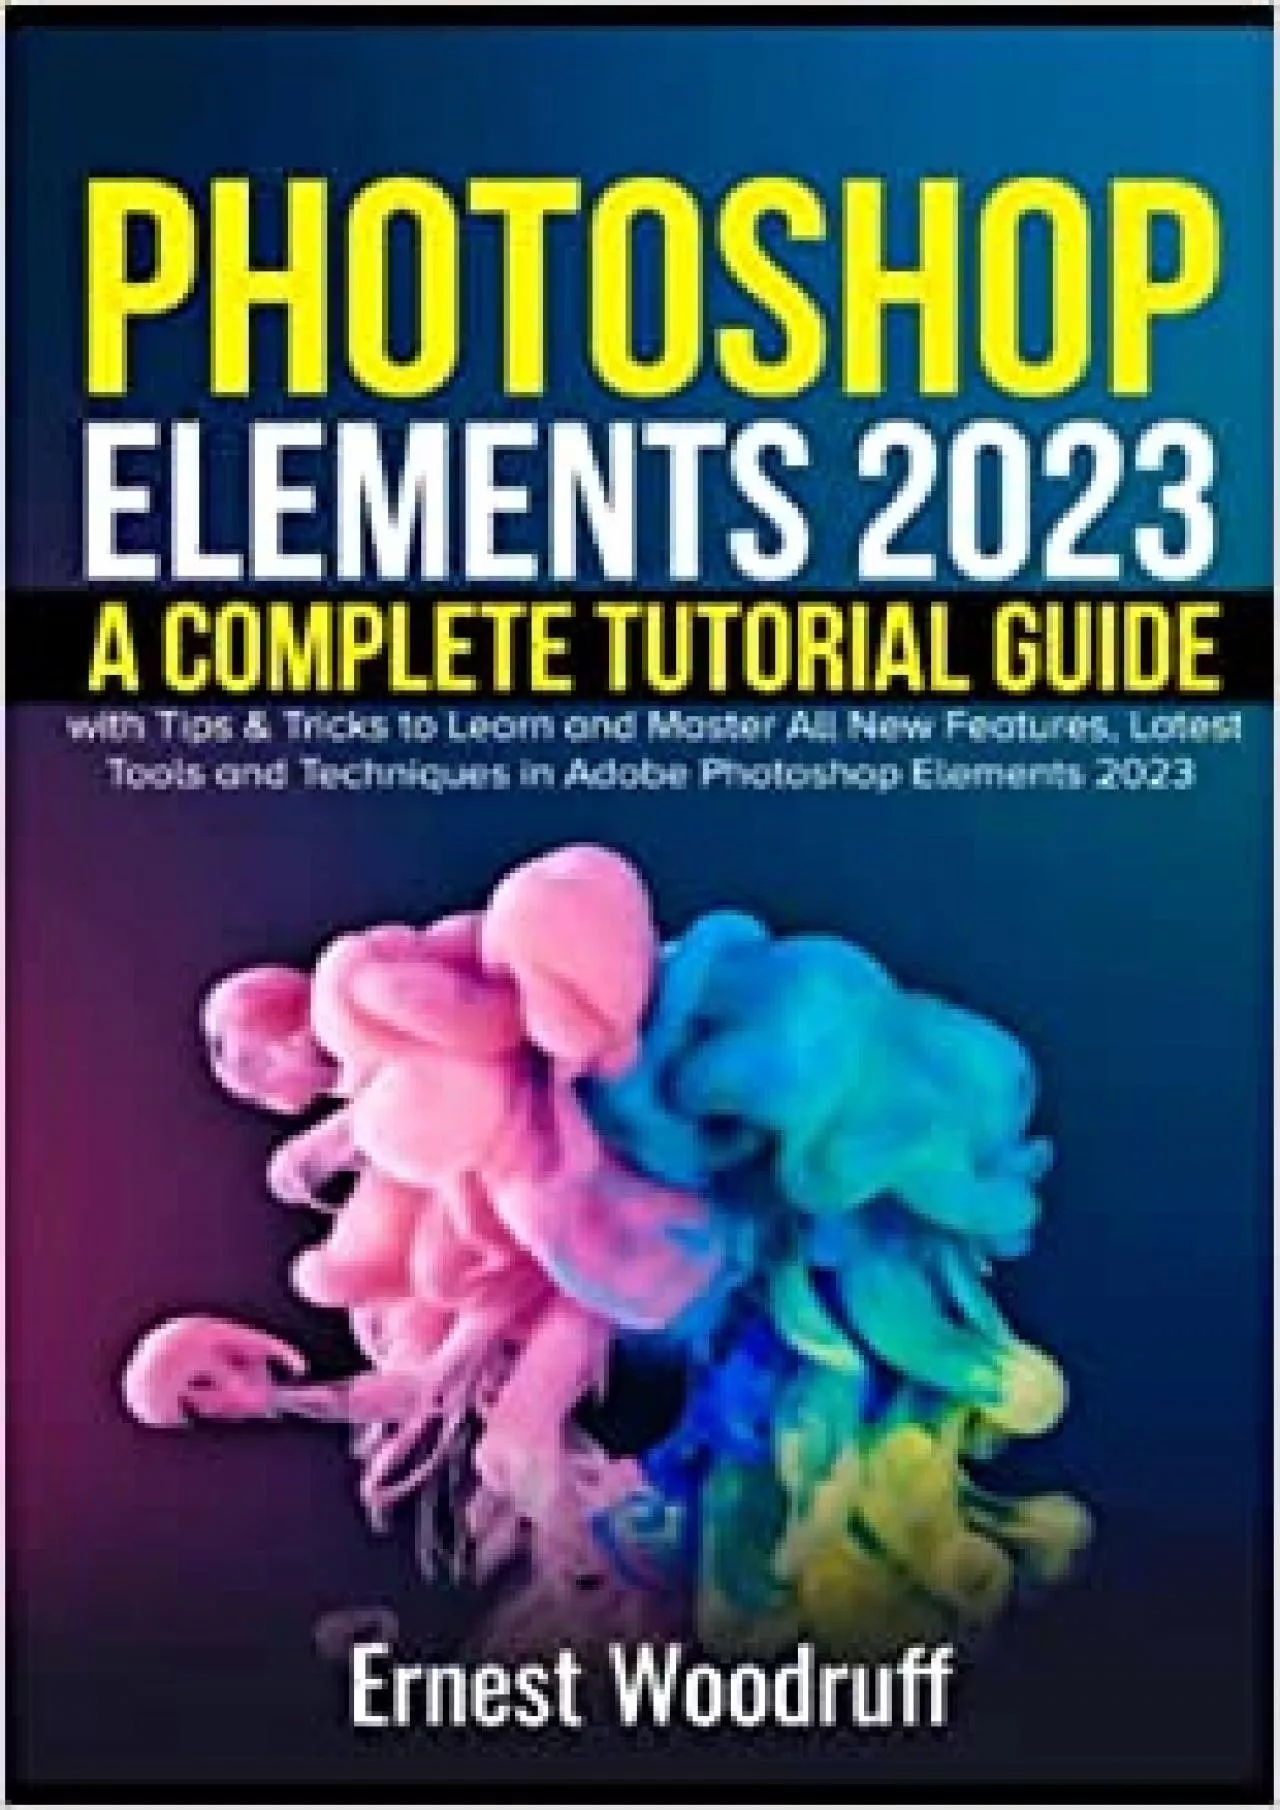 Photoshop Elements 2023: A Complete Tutorial Guide for Beginners with Tips & Tricks to